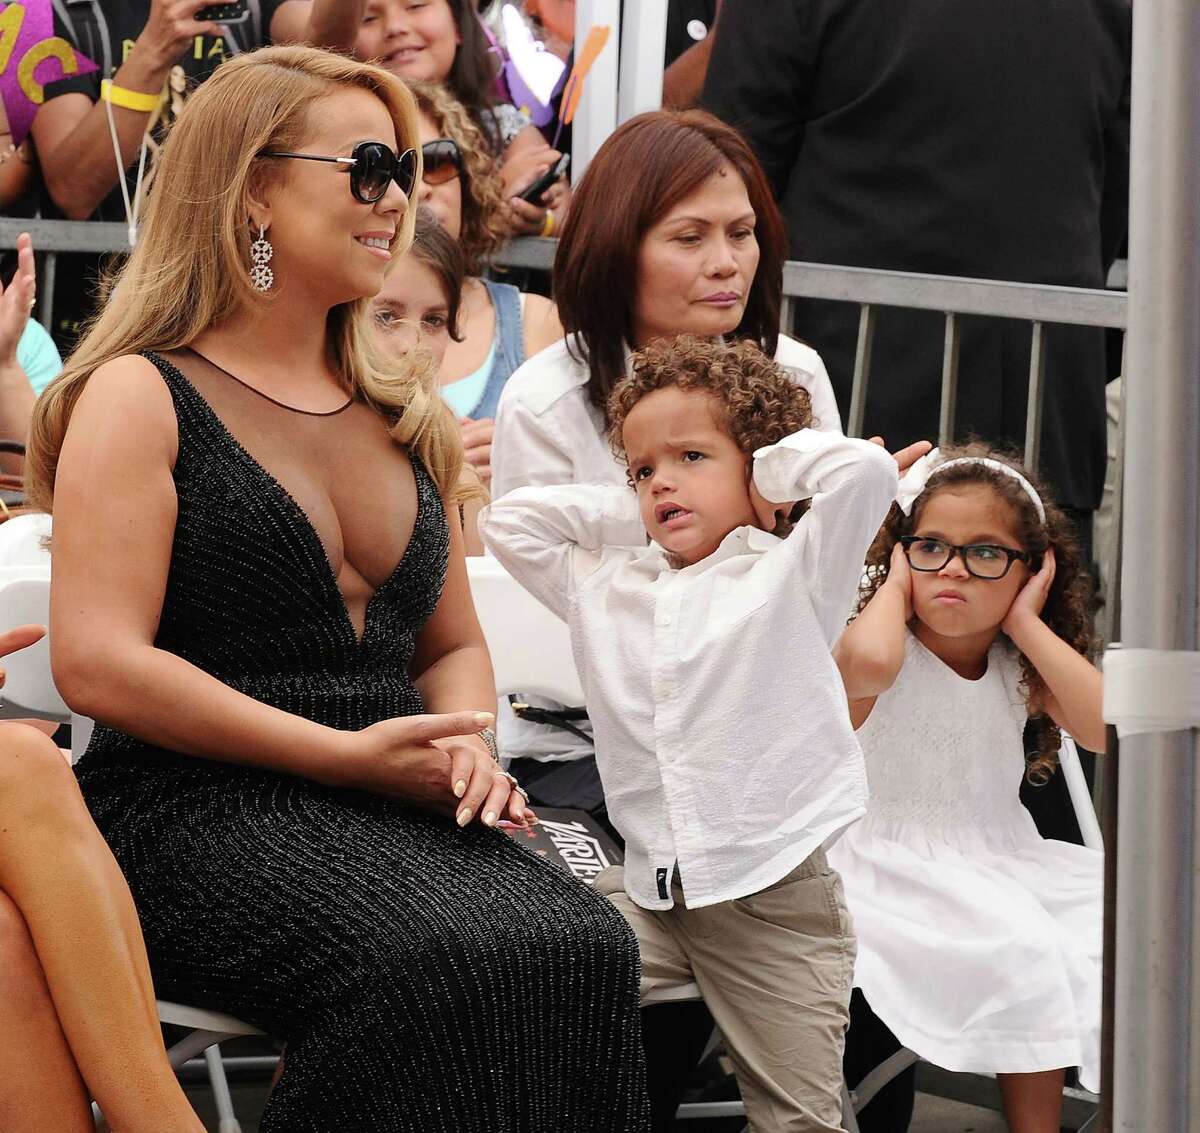 HOLLYWOOD, CA - AUGUST 05: Mariah Carey and children Moroccan Scott Cannon and Monroe Cannon attend Carey's induction into the Hollywood Walk of Fame on August 5, 2015 in Hollywood, California. (Photo by Jason LaVeris/FilmMagic)